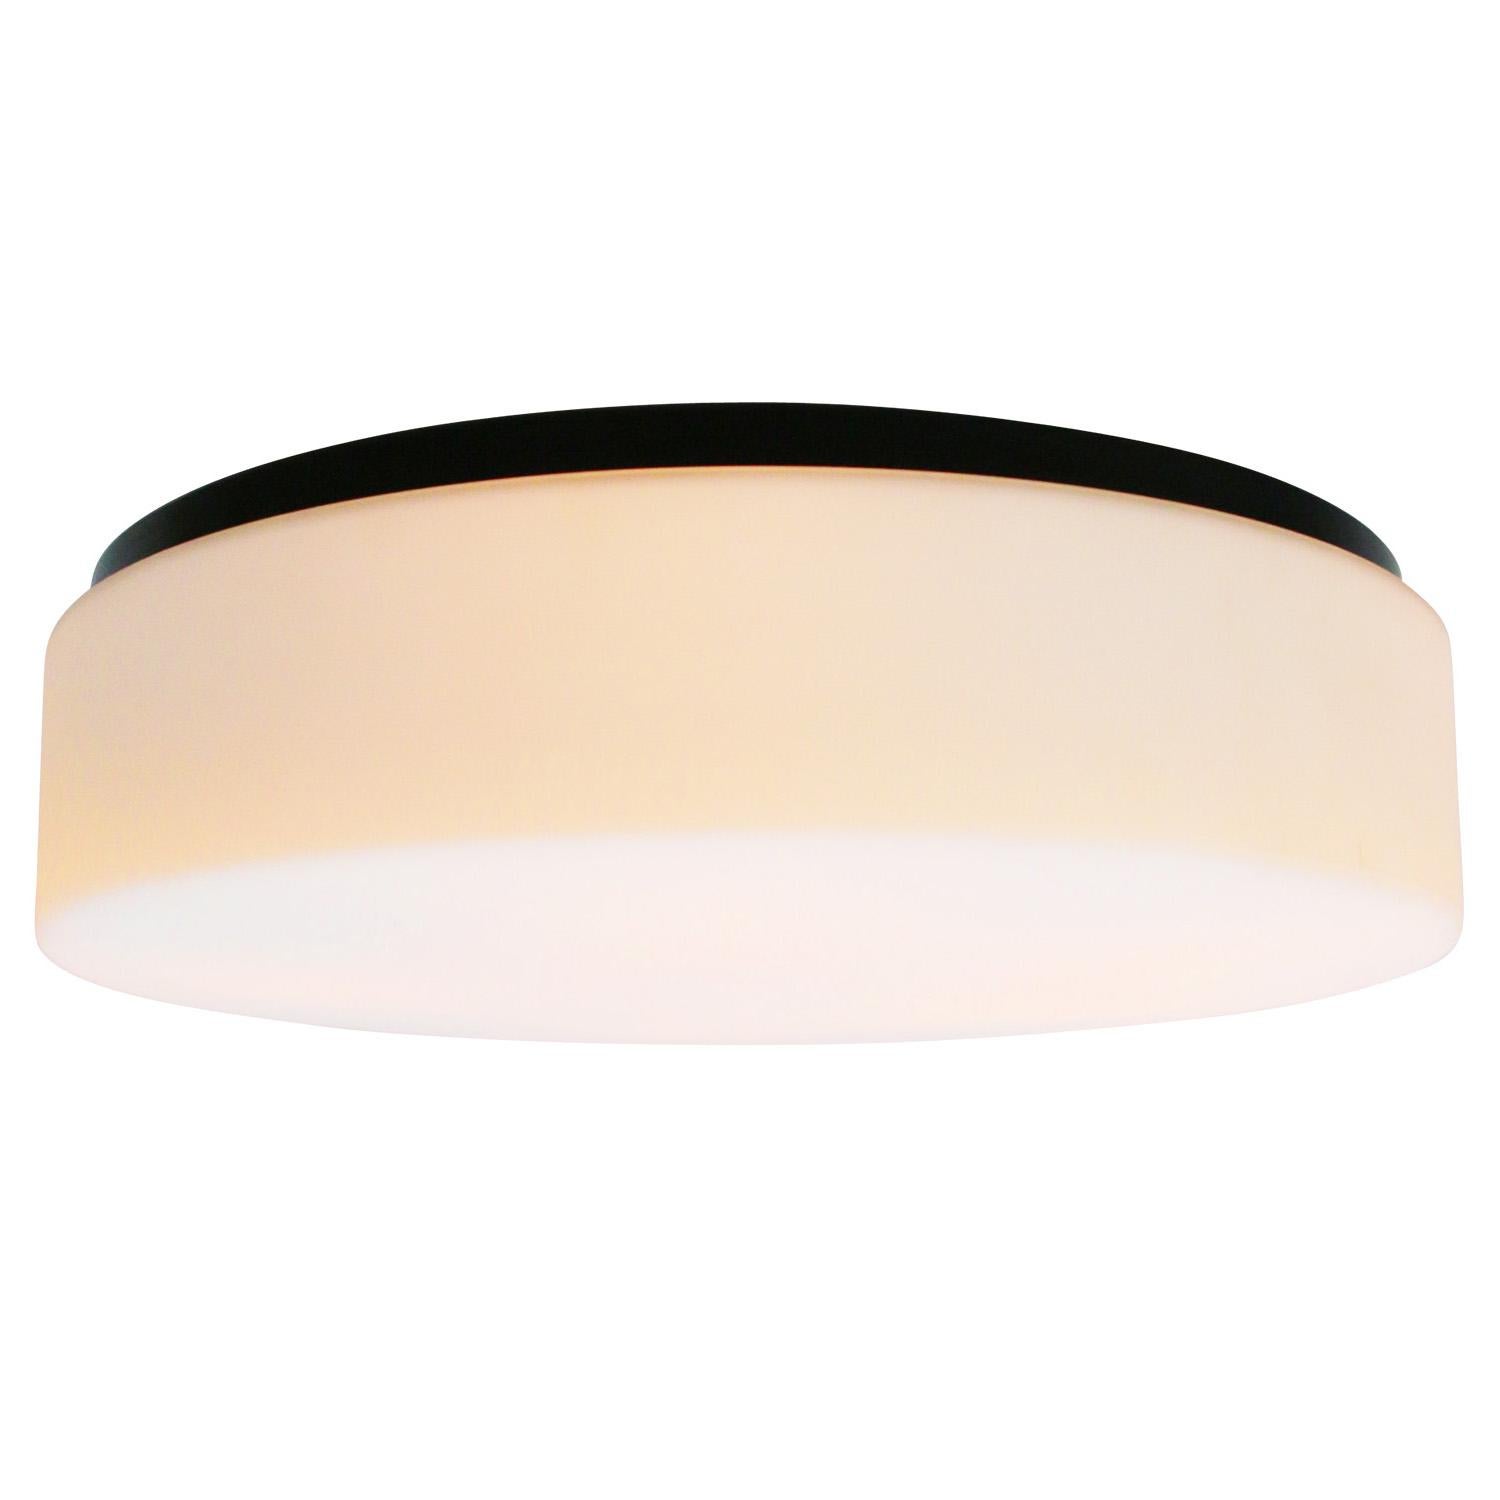 Extra extra large German Opaline Industrial ceiling lamp from BEGA Limburg

Metal base with white opaline glass

5x E27 / E26

Weight: 6.00 kg / 13.2 lb

Priced per individual item. All lamps have been made suitable by international